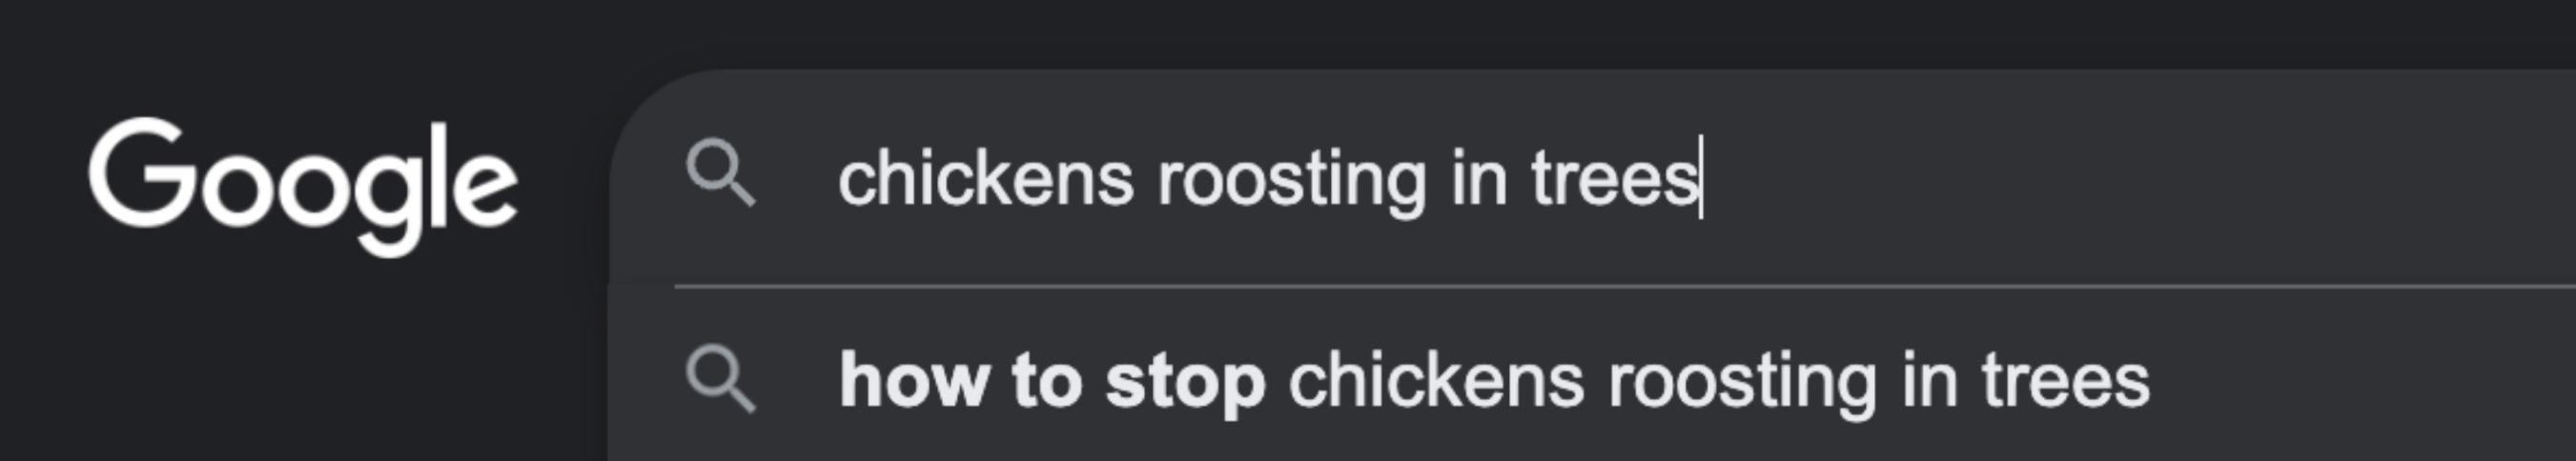 A screenshot of a Google search for 'chickens roosting in trees', where the top search suggestion is 'how to stop chickens roosting in trees'